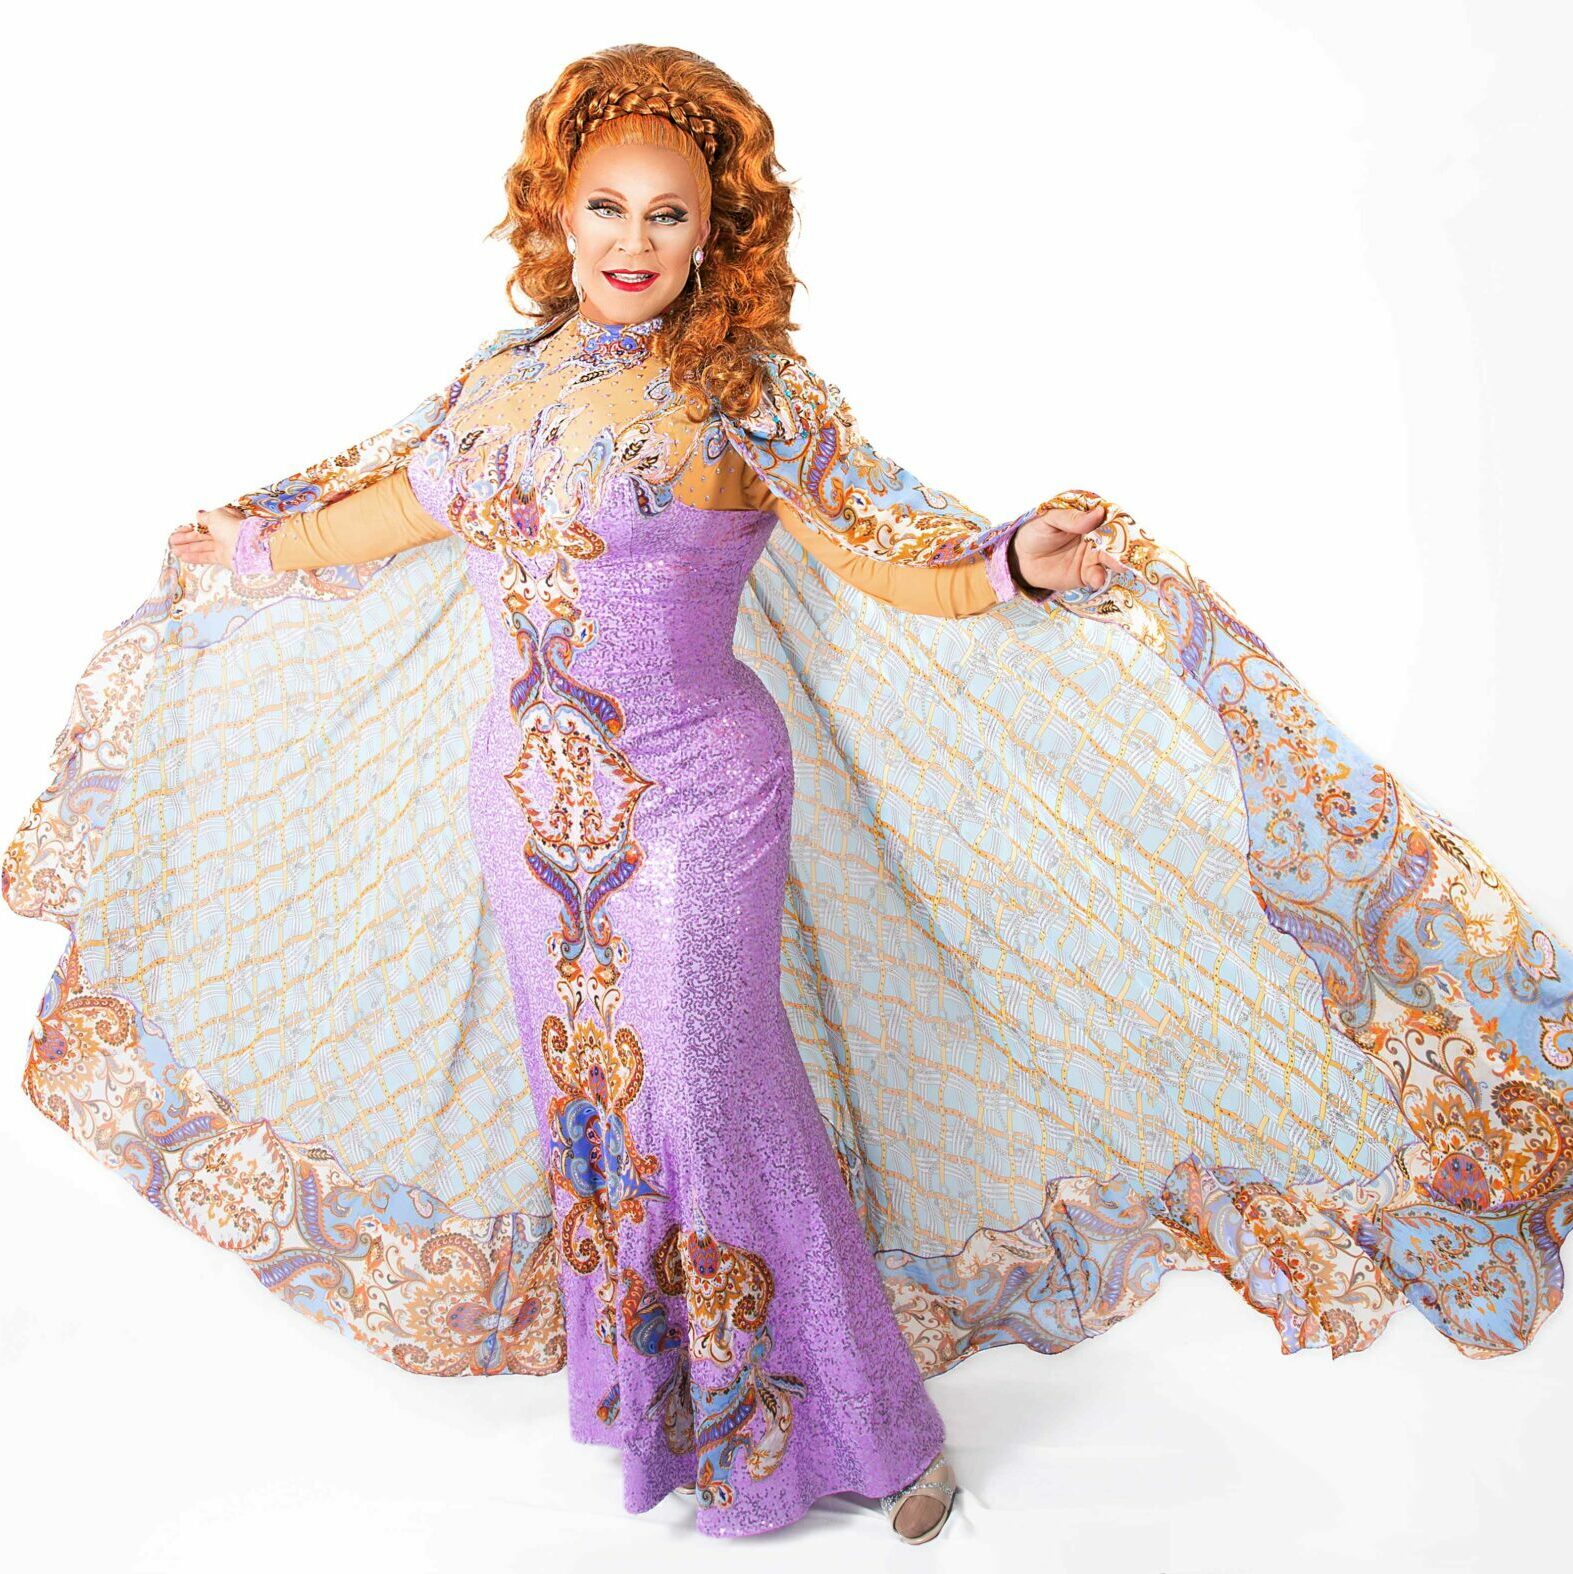 A drag queen with long red hair wearing a purple jewelled gown with a large cape